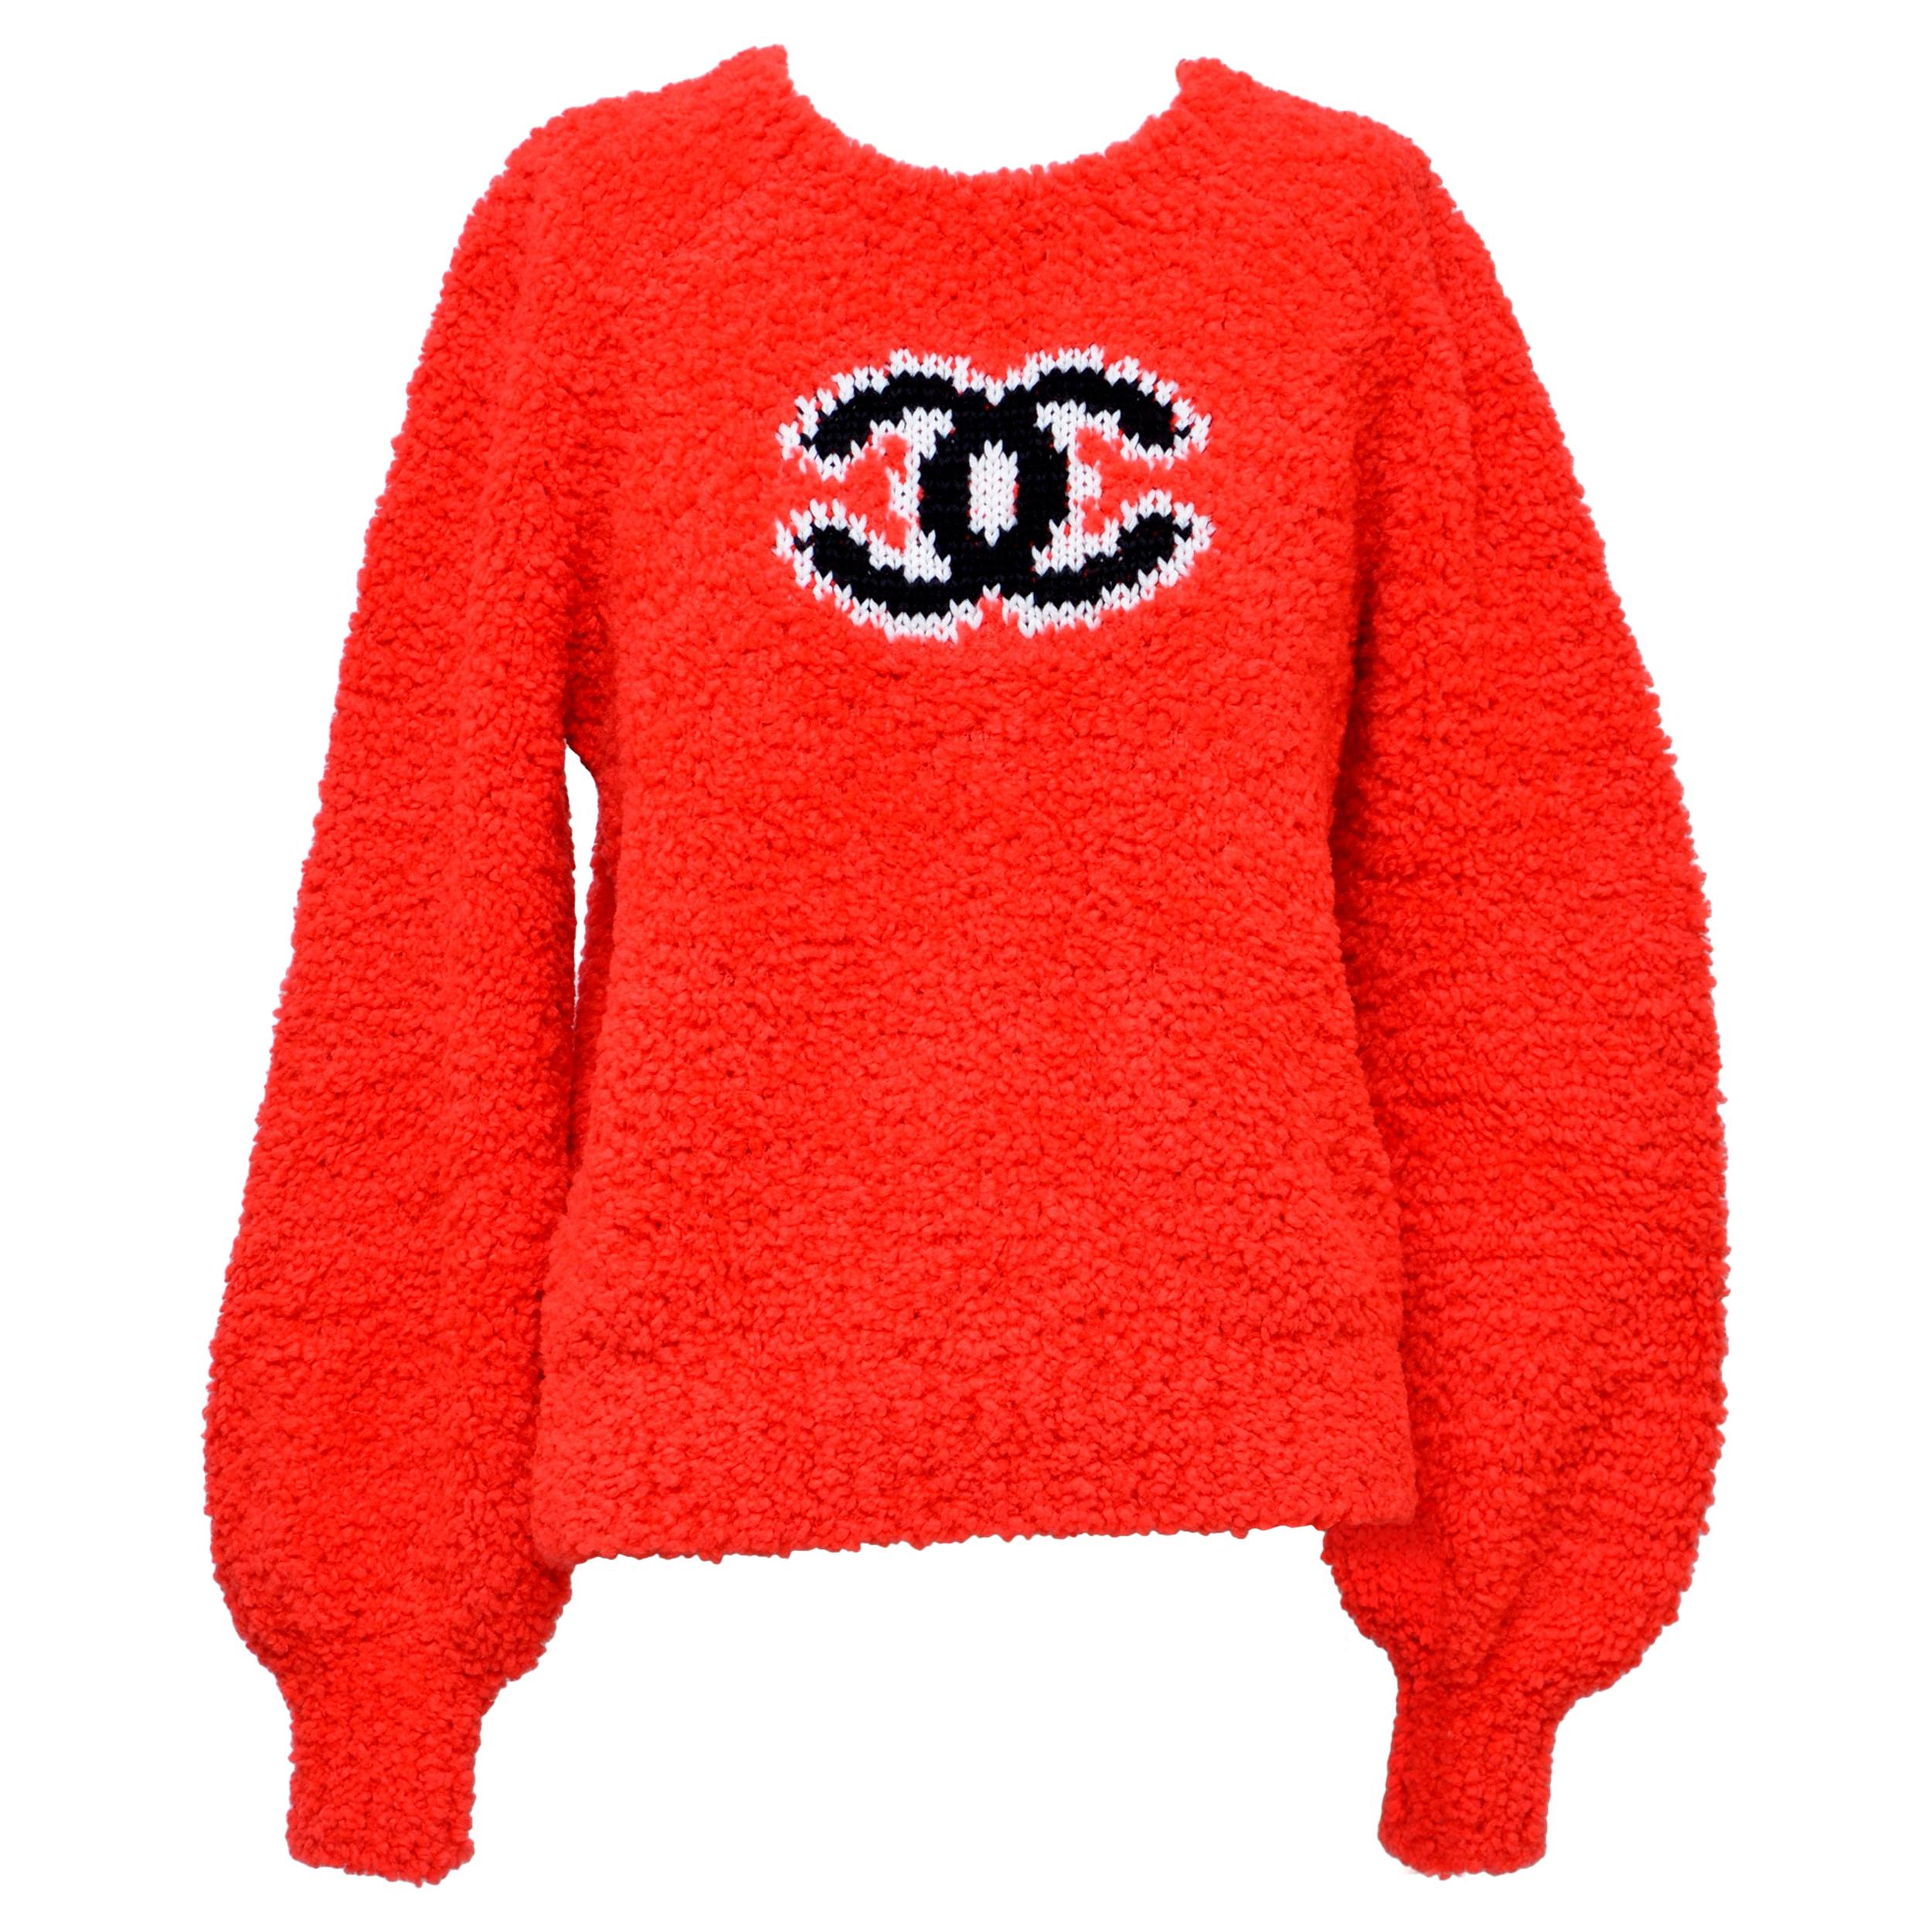 Chanel Teddy - 5 For Sale on 1stDibs | chanel teddy jacket, chanel teddy  sweater, chanel pulover